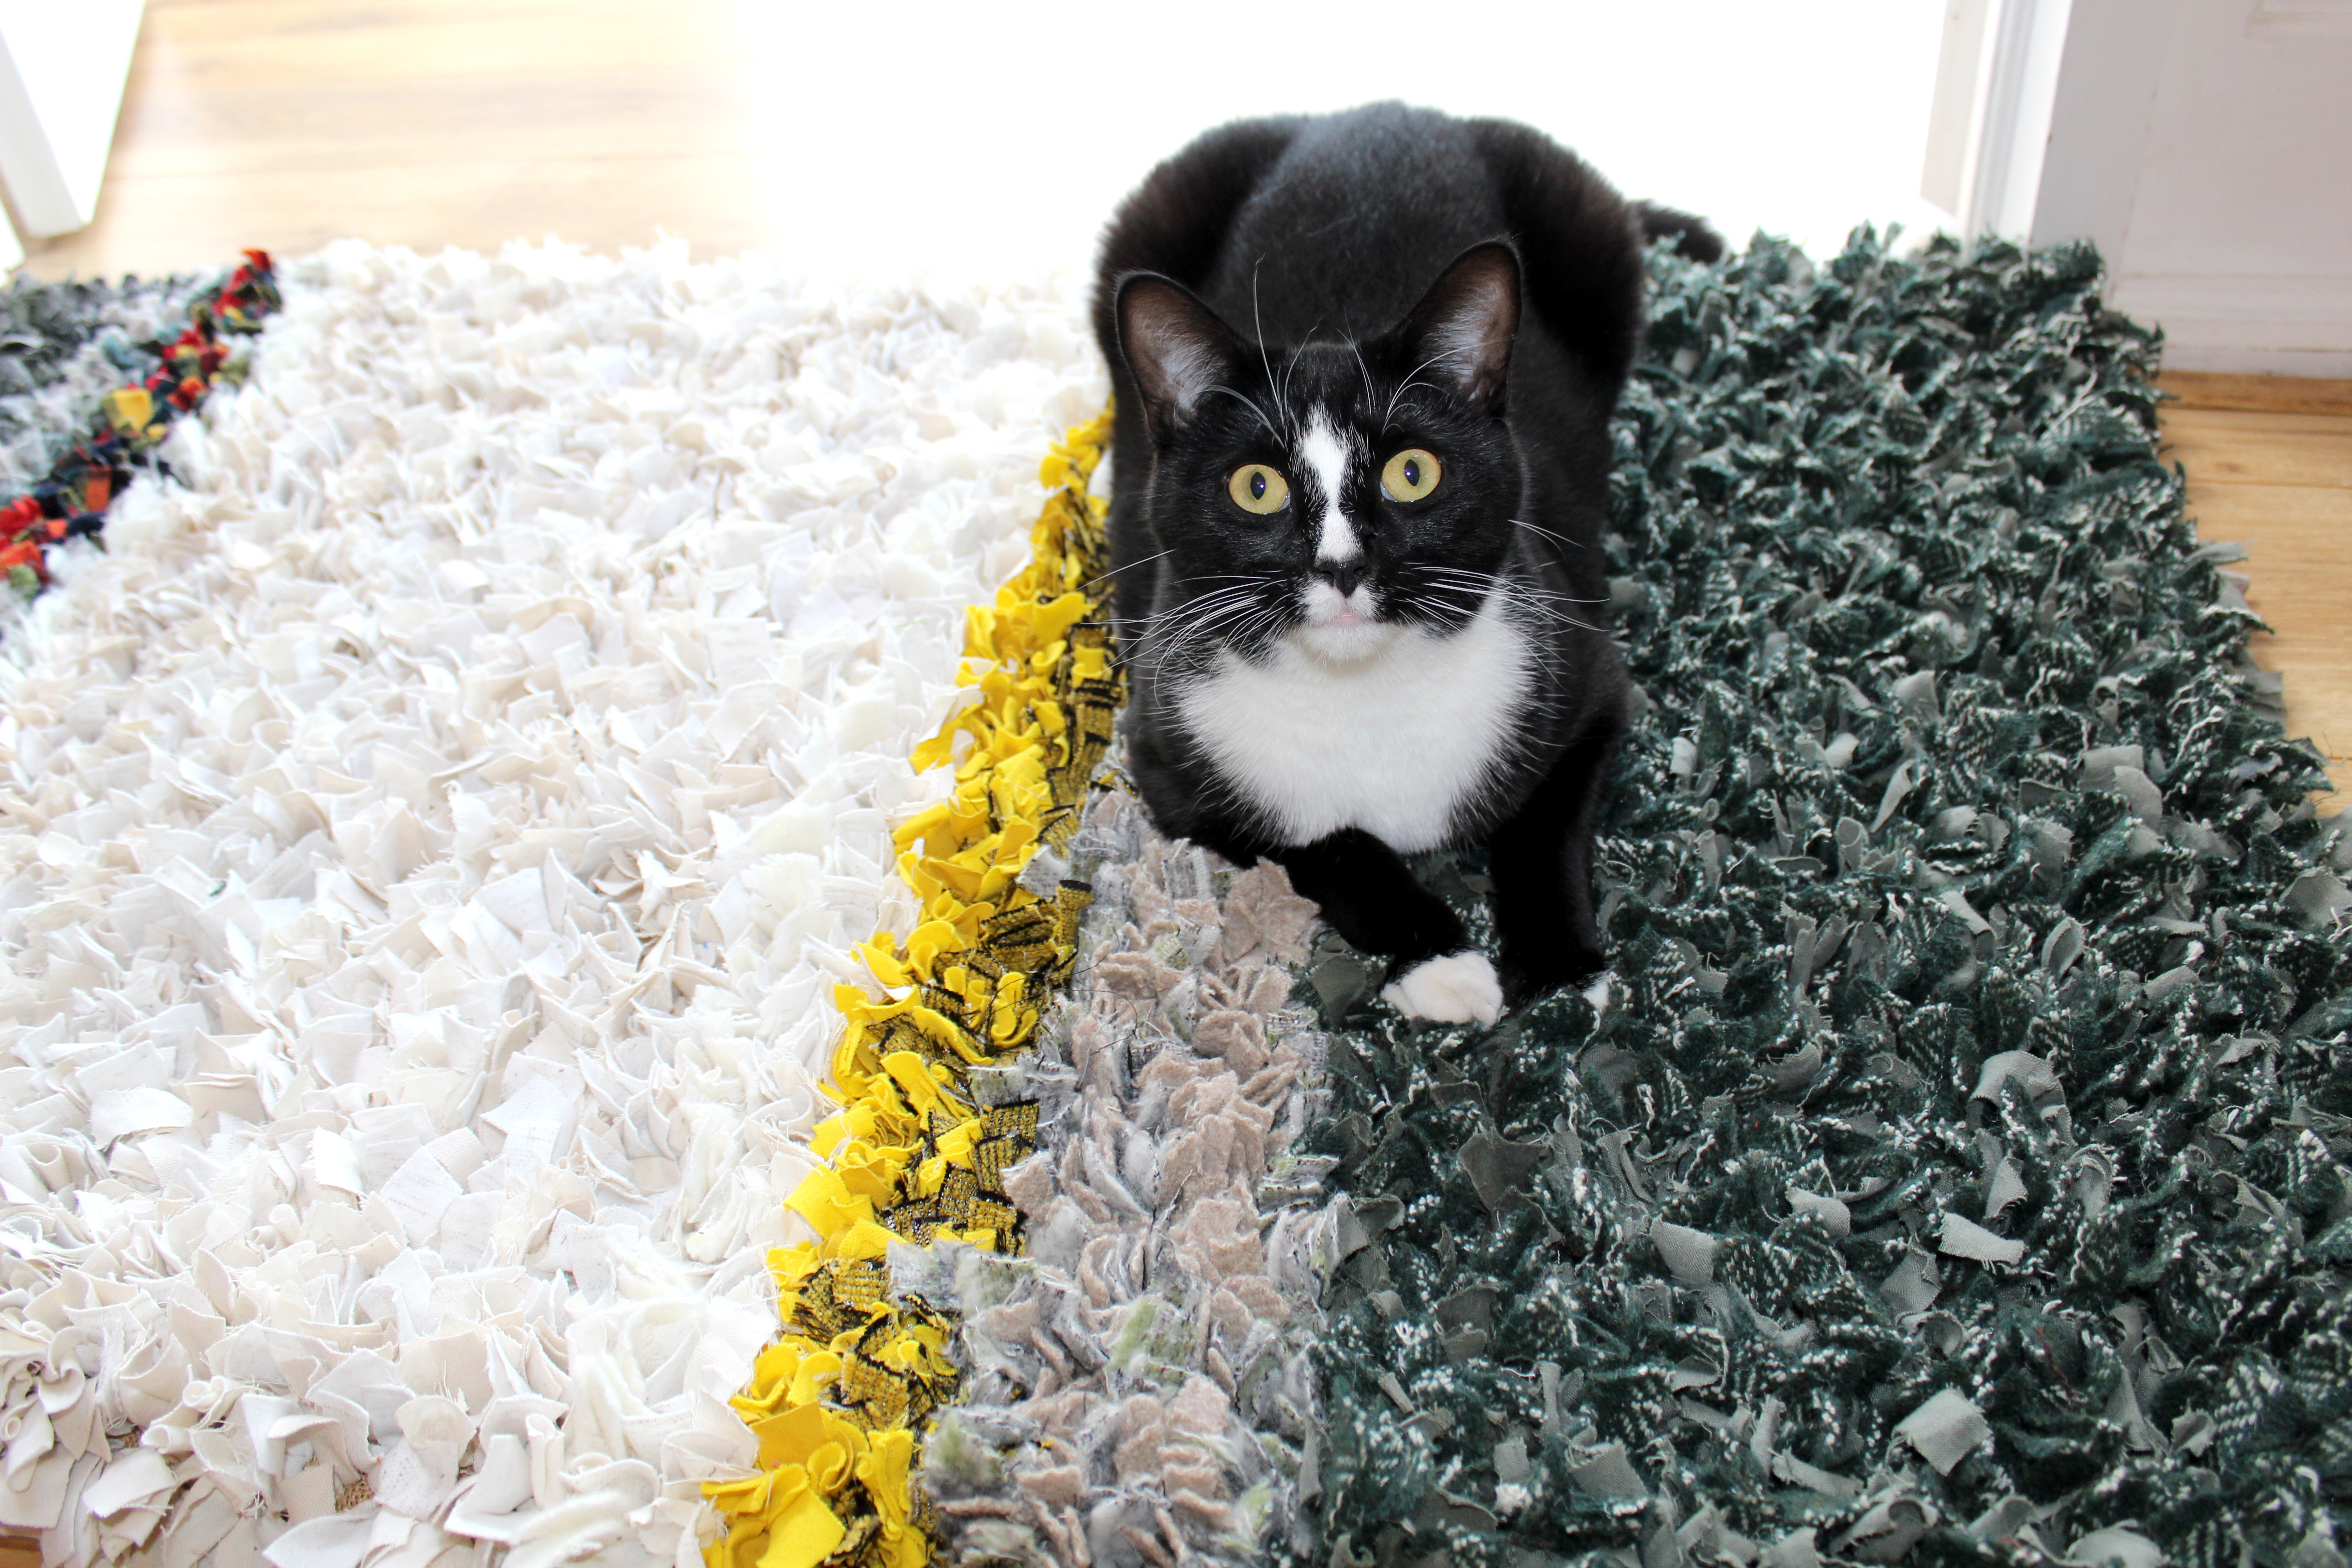 Proggy rag rug with black and white cat sitting on it